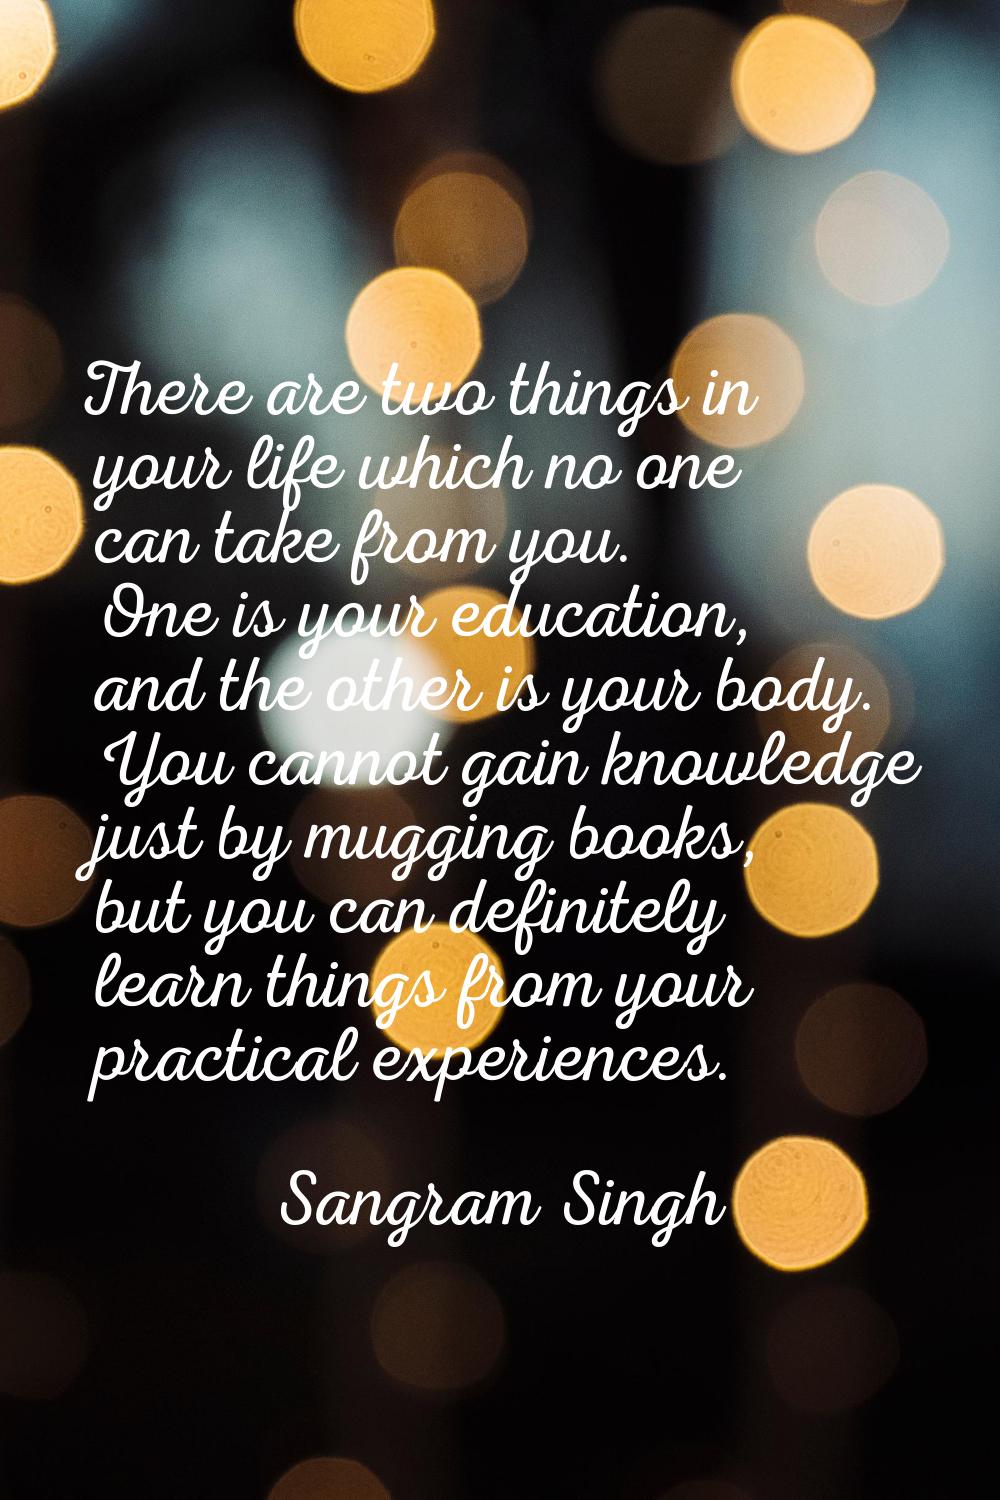 There are two things in your life which no one can take from you. One is your education, and the ot